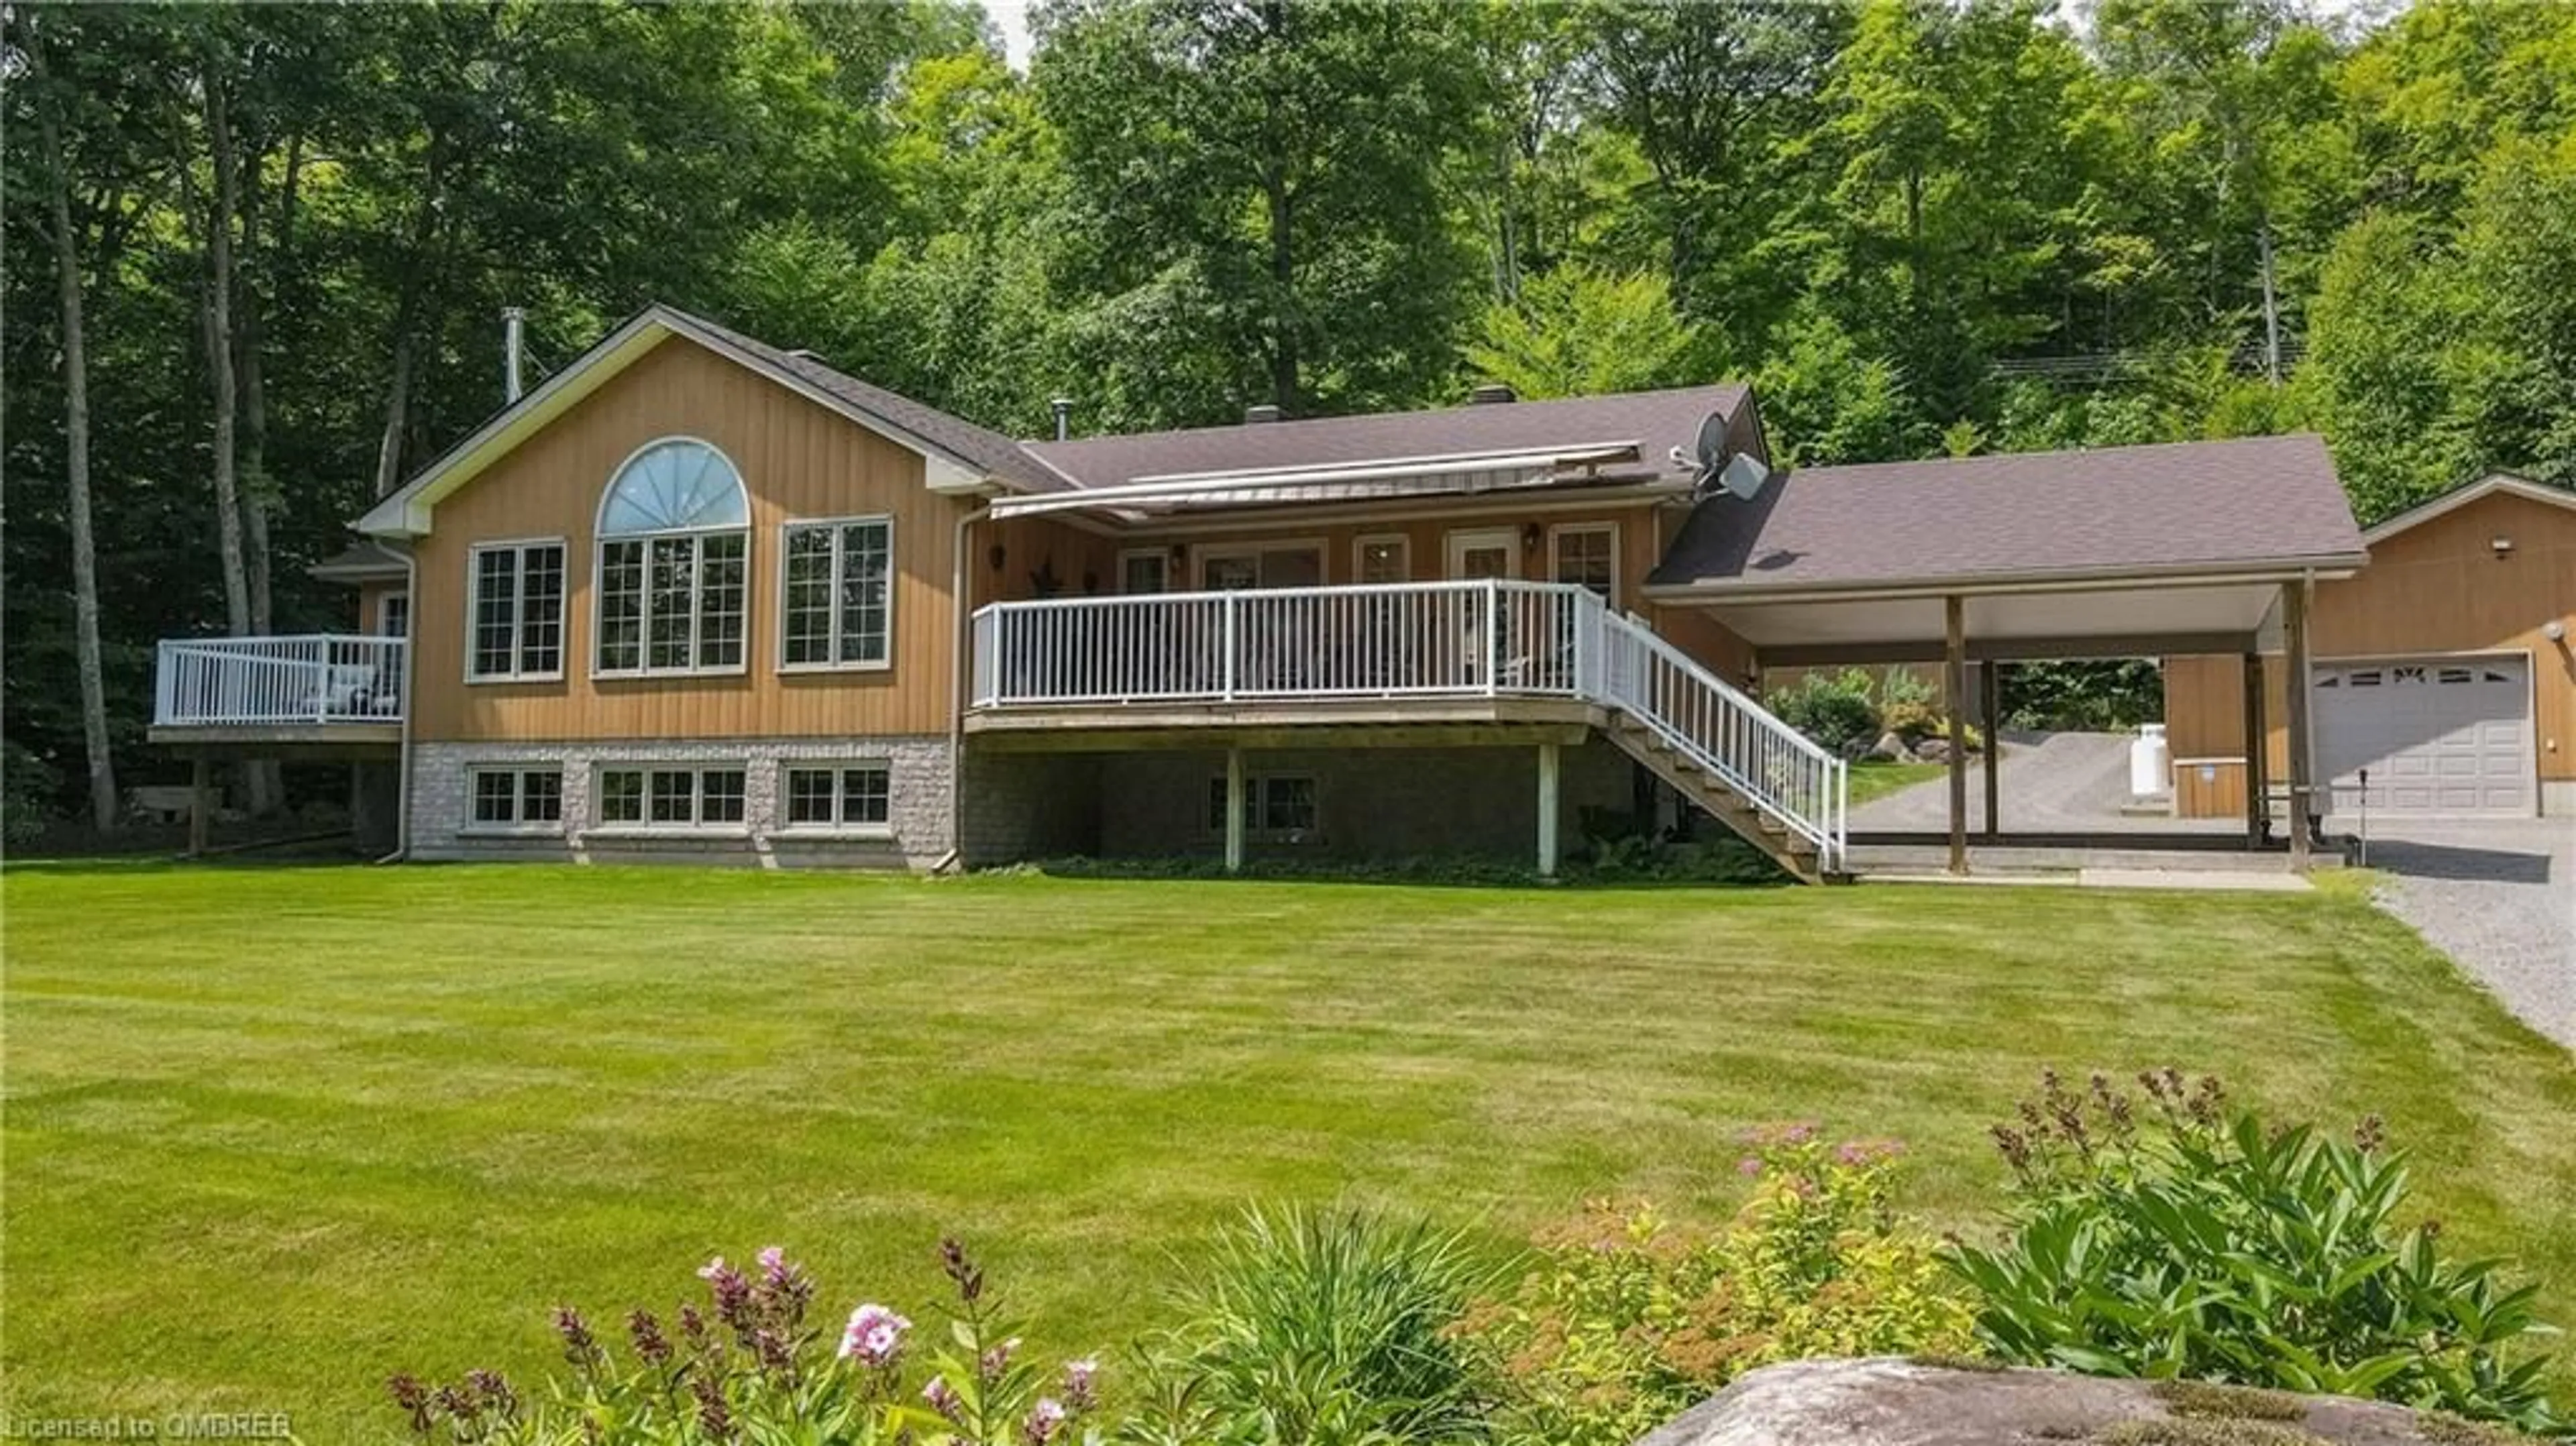 Frontside or backside of a home for 165 Lakeshore Dr, Combermere Ontario K0J 1L0